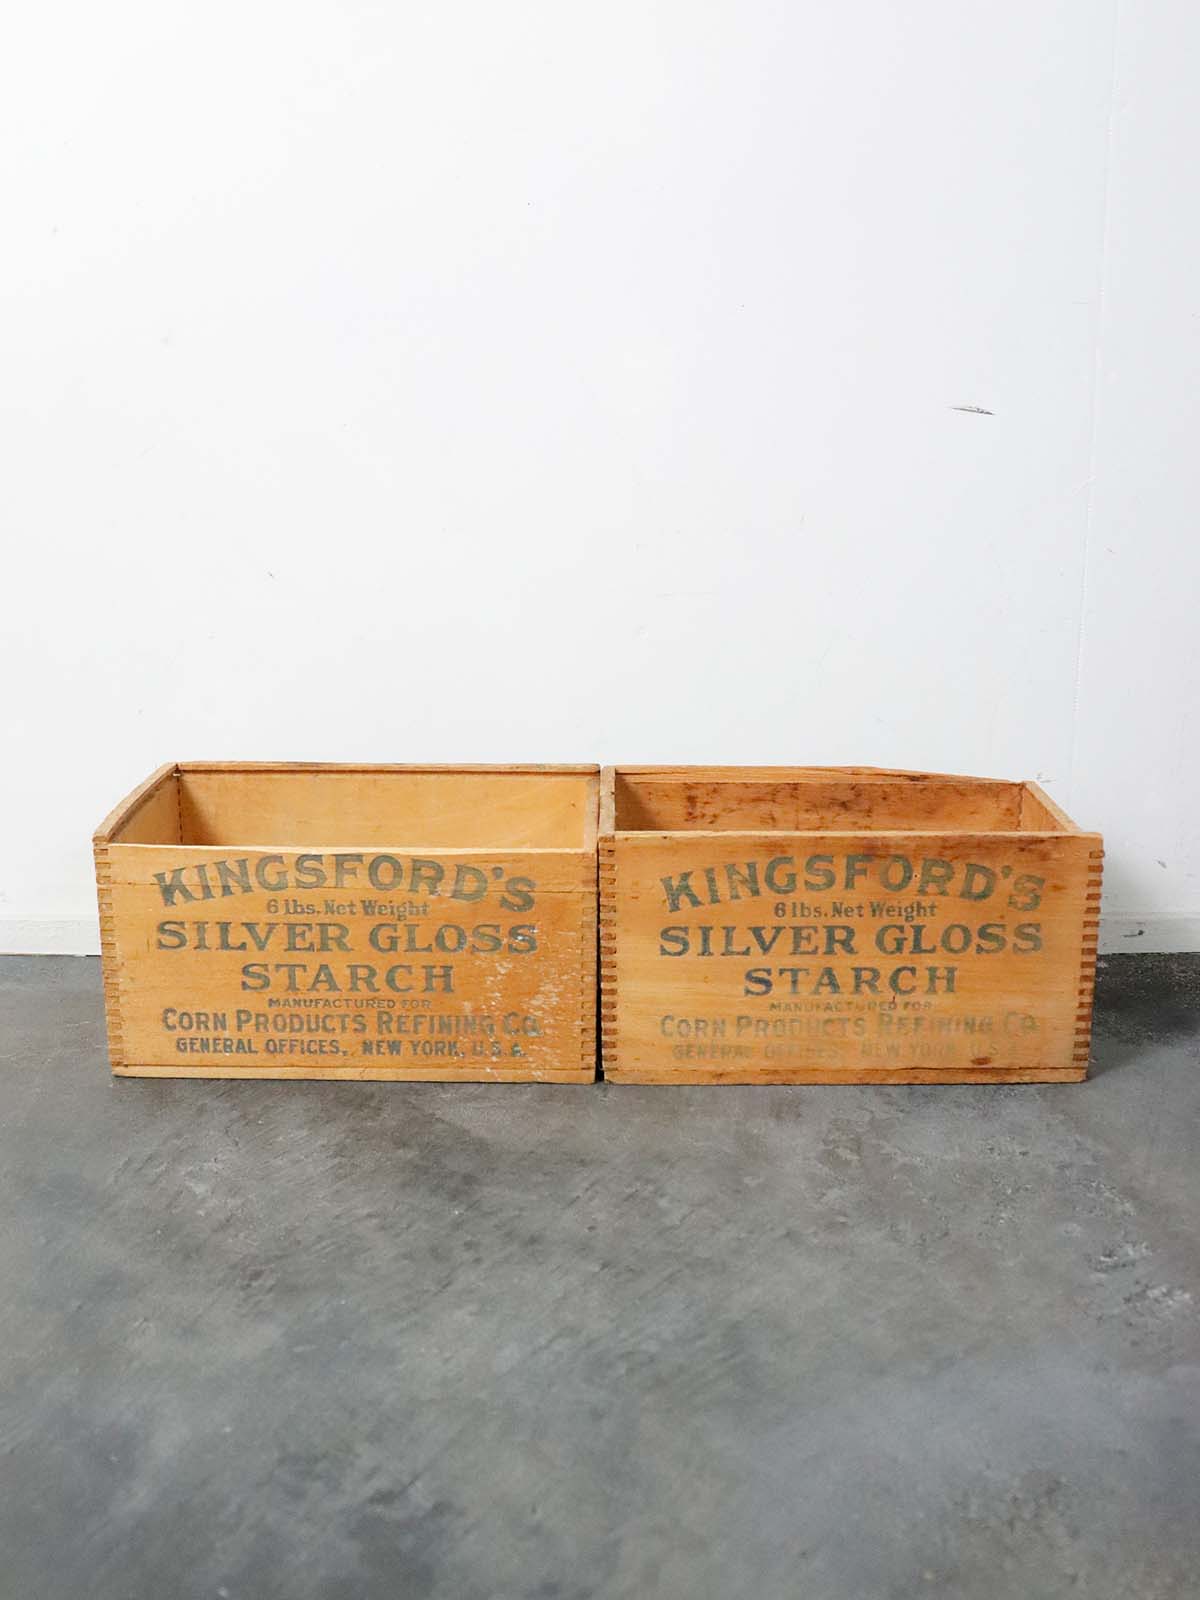 1940's,wood crate,box,vintage,USA